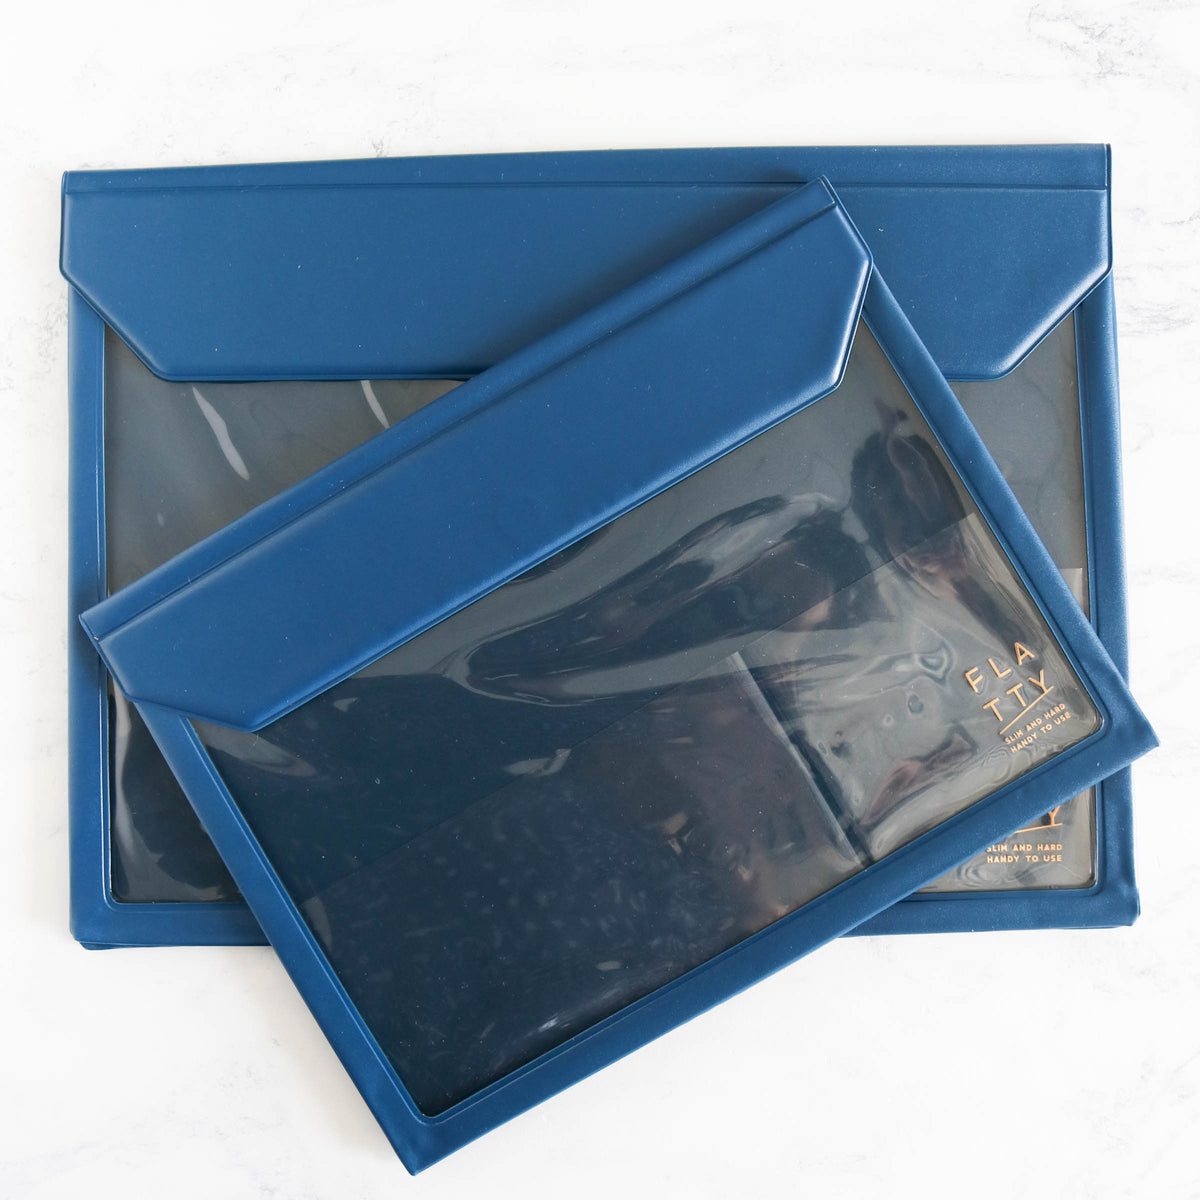 Flatty Project Carrying Case - Navy